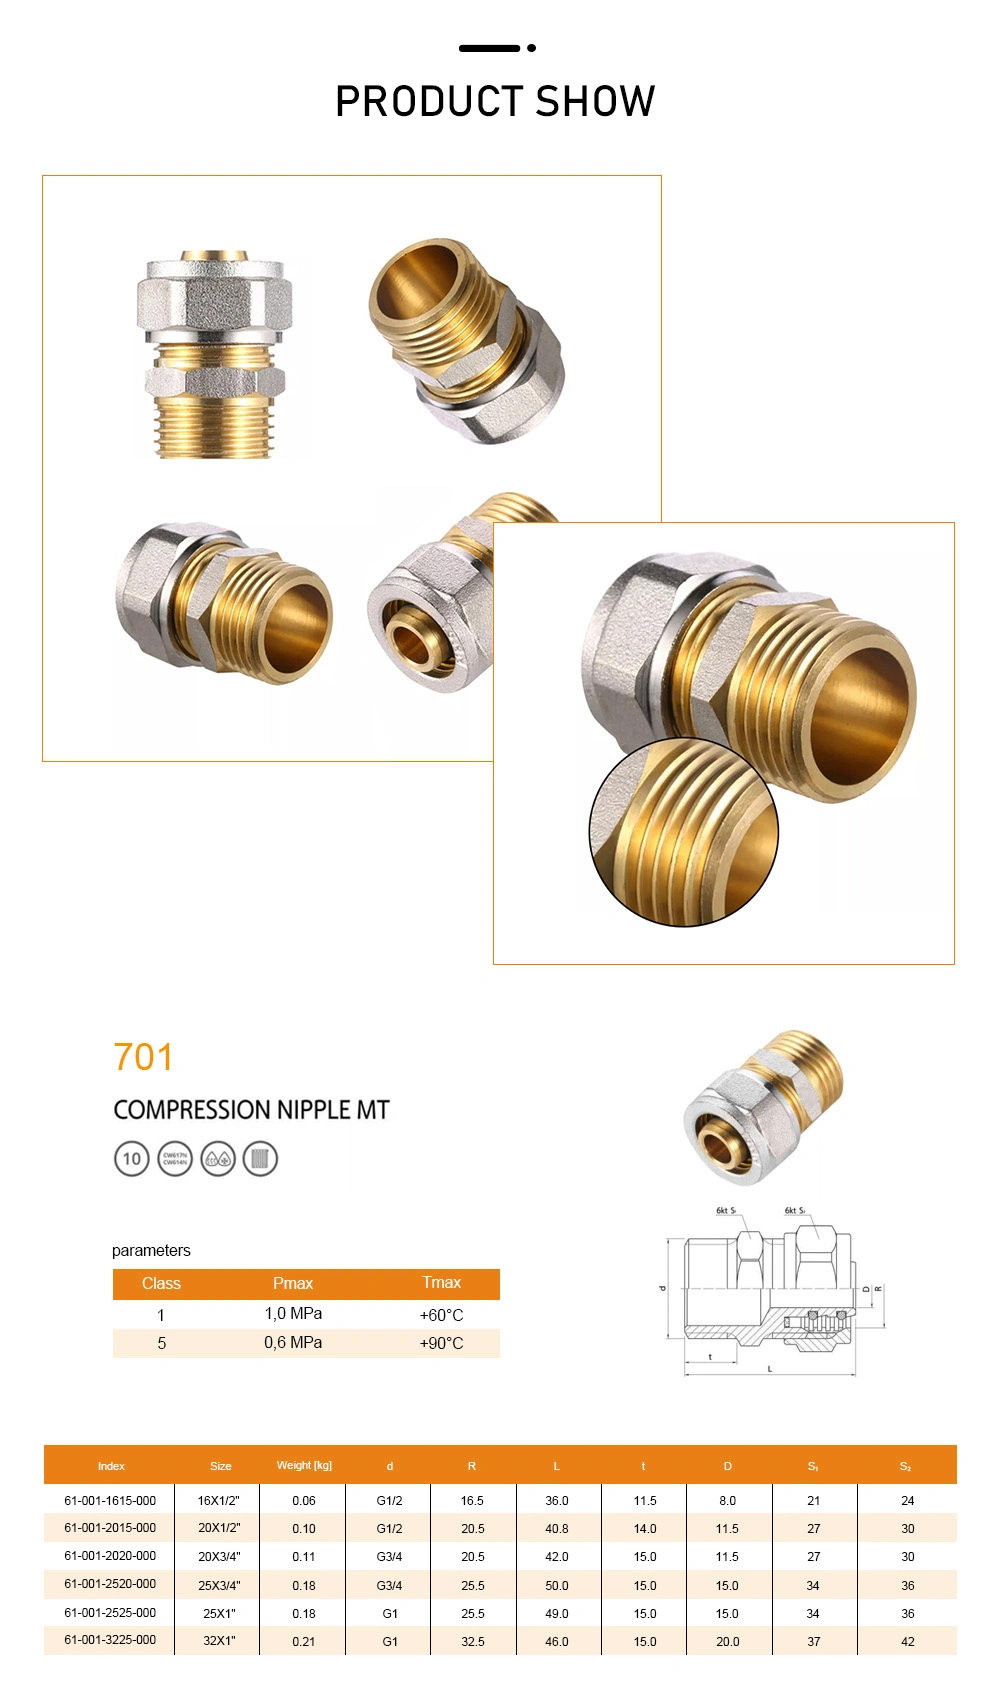 Straight Male Plumbing Screw Socket Coupling Pipe Fittings Pex Brass Compression Fitting